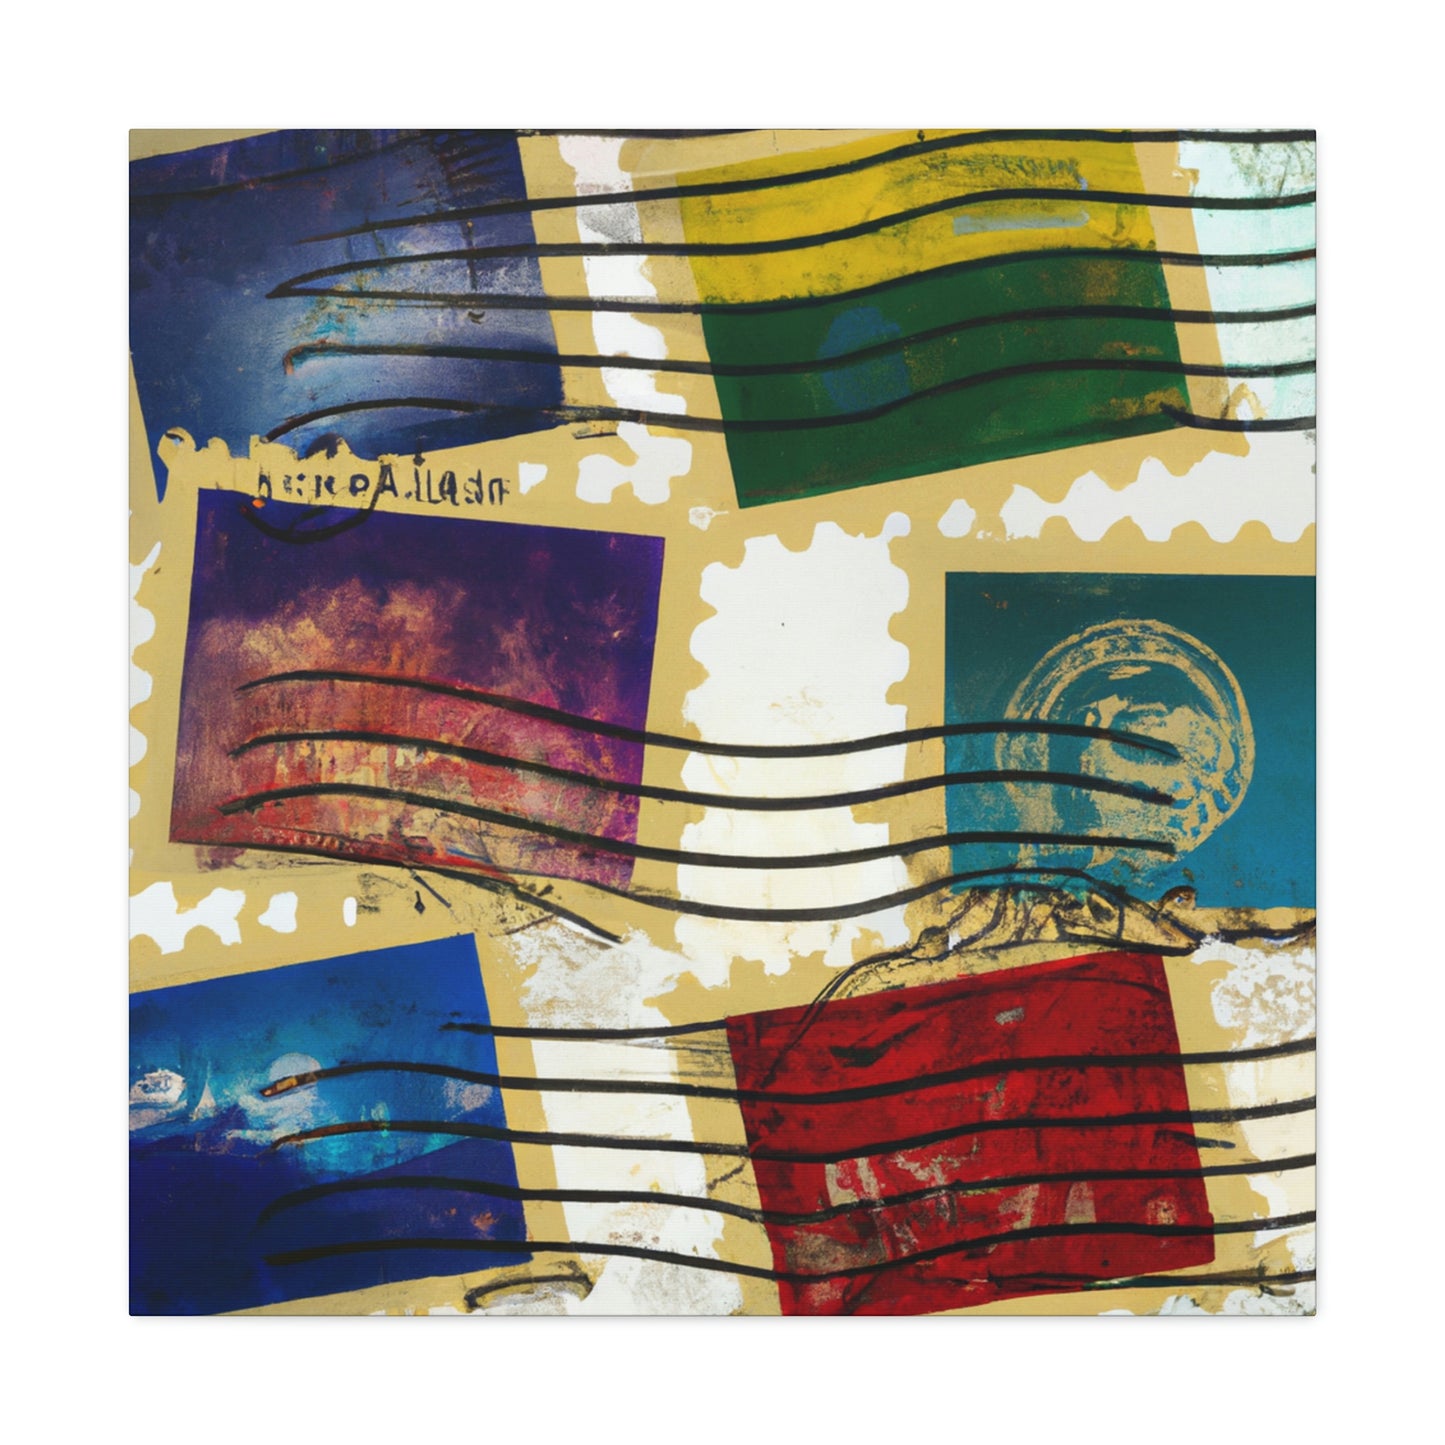 Global Greetings Stamp Collection. - Postage Stamp Collector Canvas Wall Art